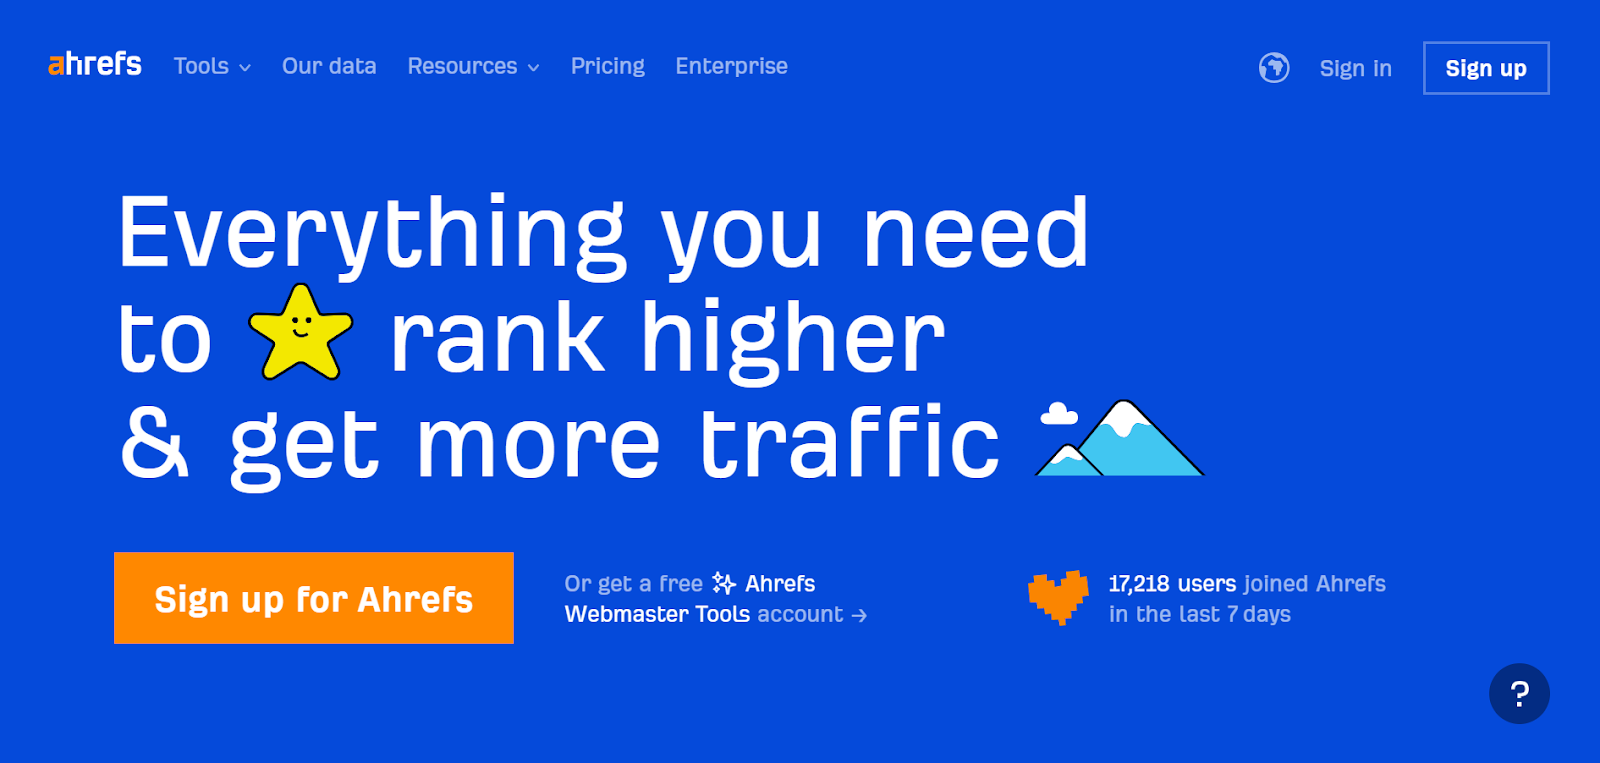 A screenshot of Ahrefs' home page displaying the top navigation menu, login, and sign-up buttons.